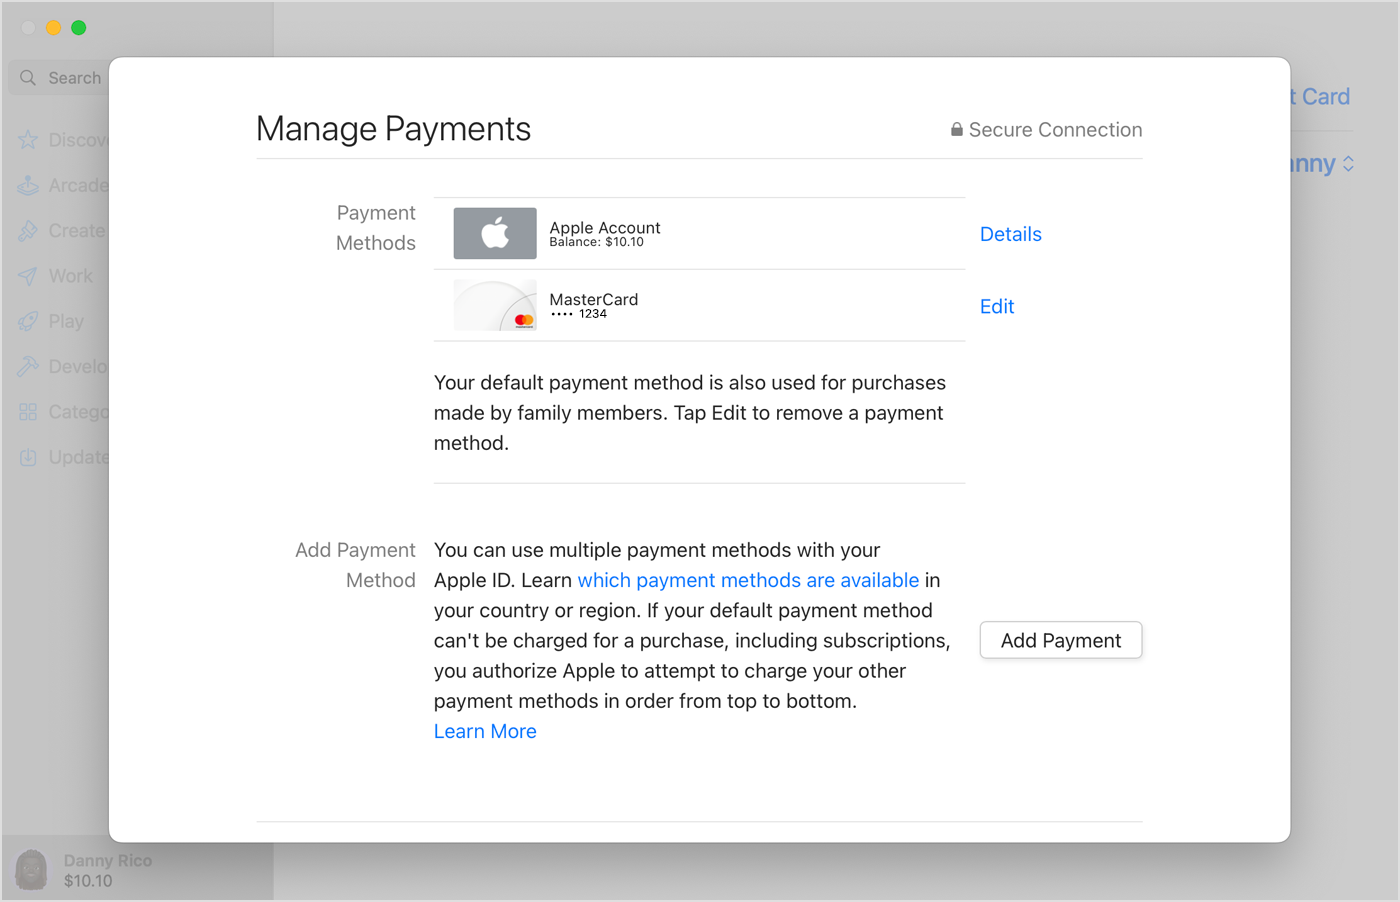 On Mac, the Add Payment button appears below the list of payment methods.